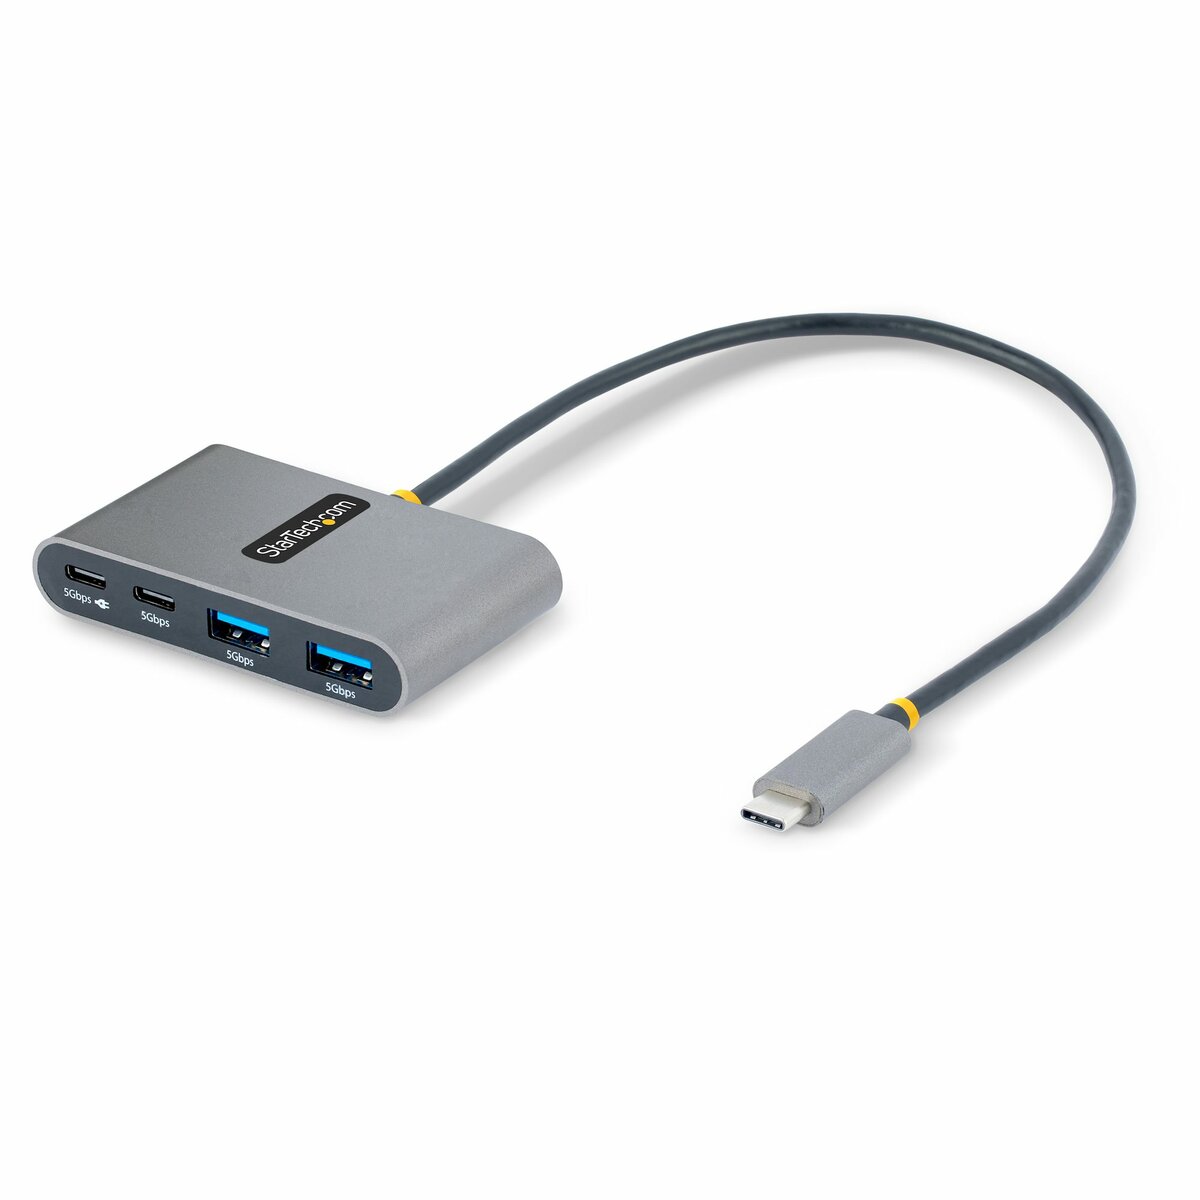 Product  StarTech.com 4-Port USB-C Hub with 100W Power Delivery  Pass-Through Charging, 2x USB-A + 2x USB-C, 5Gbps, USBC Hub w/ 1ft (30cm)  Long Cable, Portable Laptop USB Type-C to USB-A/C Hub 